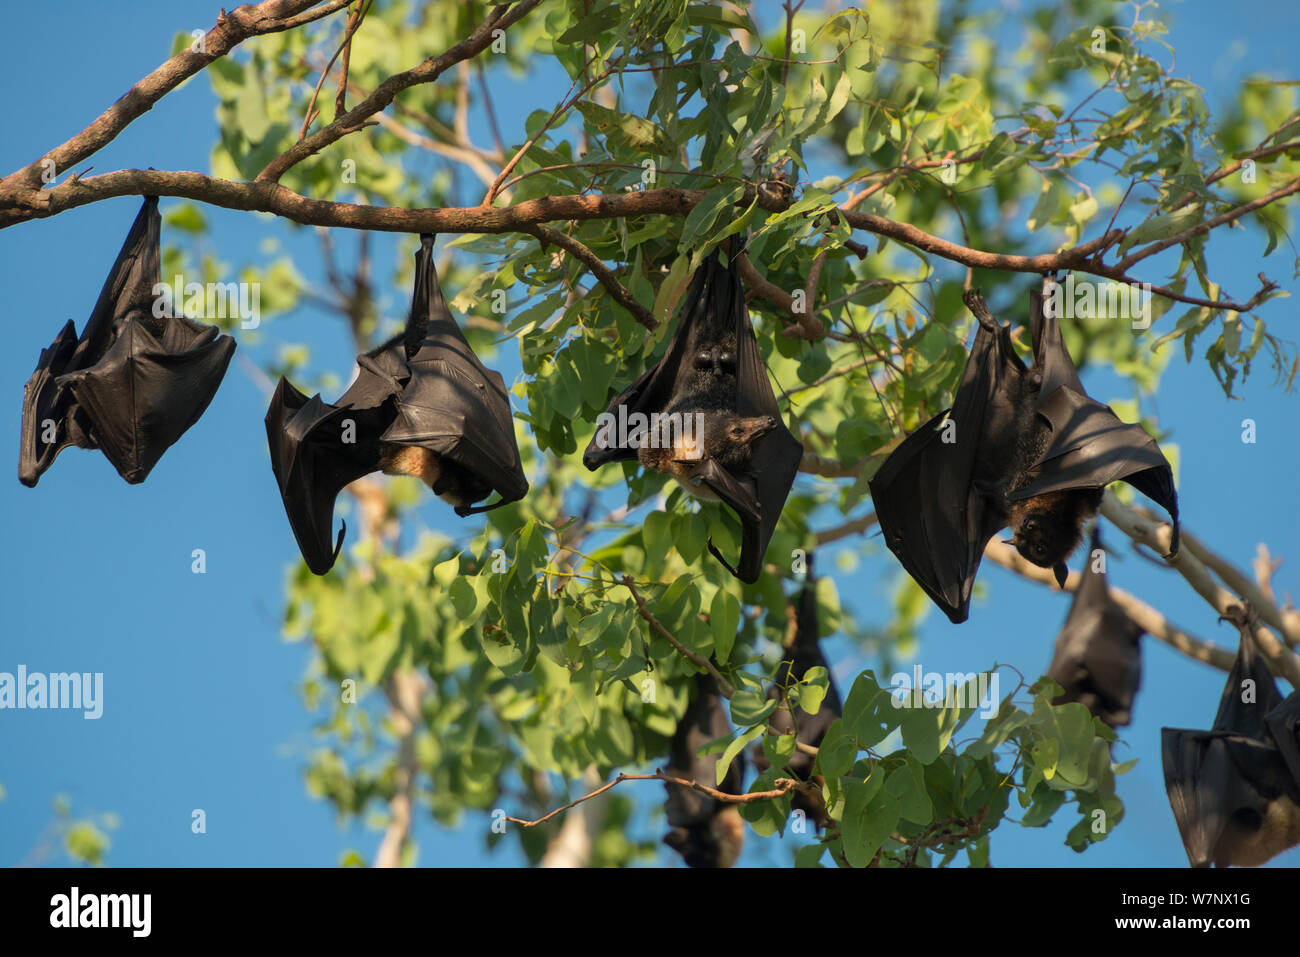 Spectacled flying fox (Pteropus conspicillatus) colony roosting during daytime, North Queensland, Australia, November 2012 Stock Photo